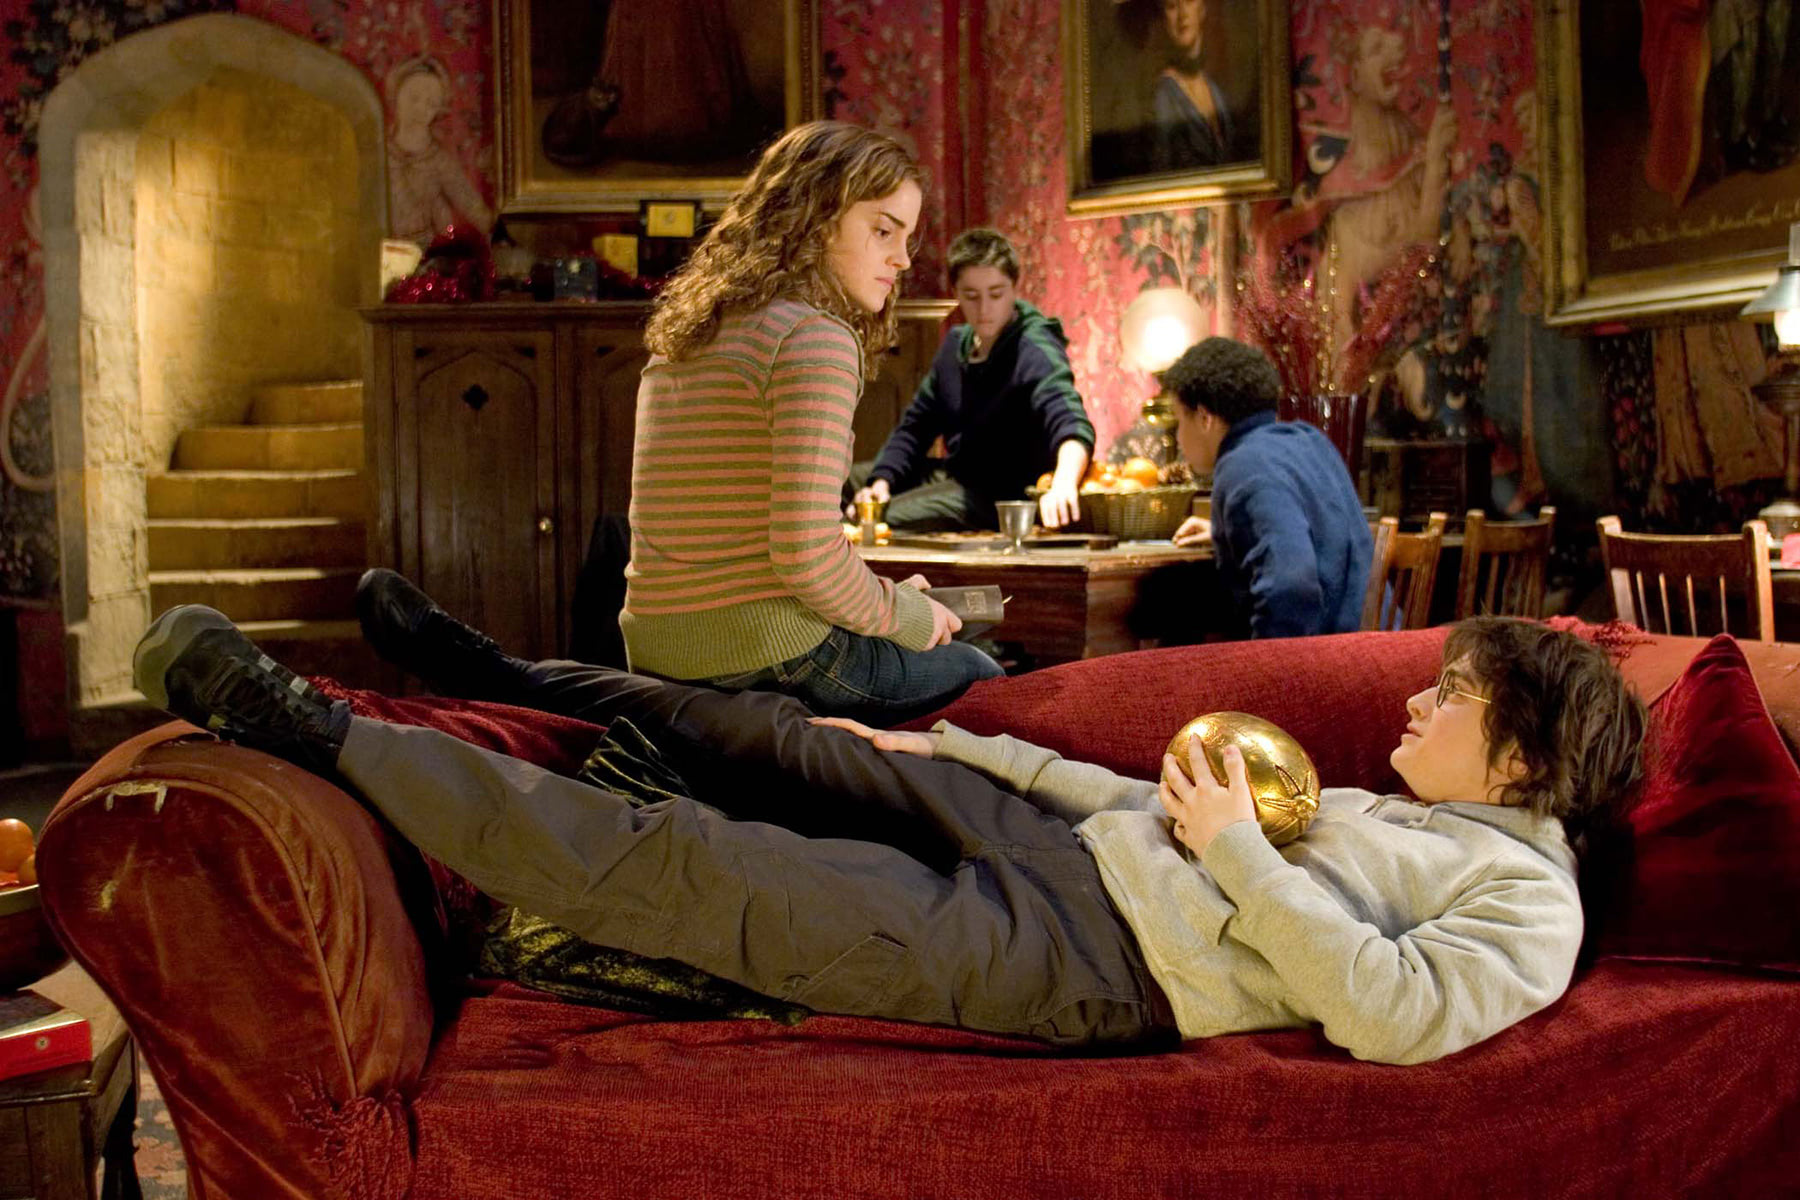 Harry and Hermione with the golden egg